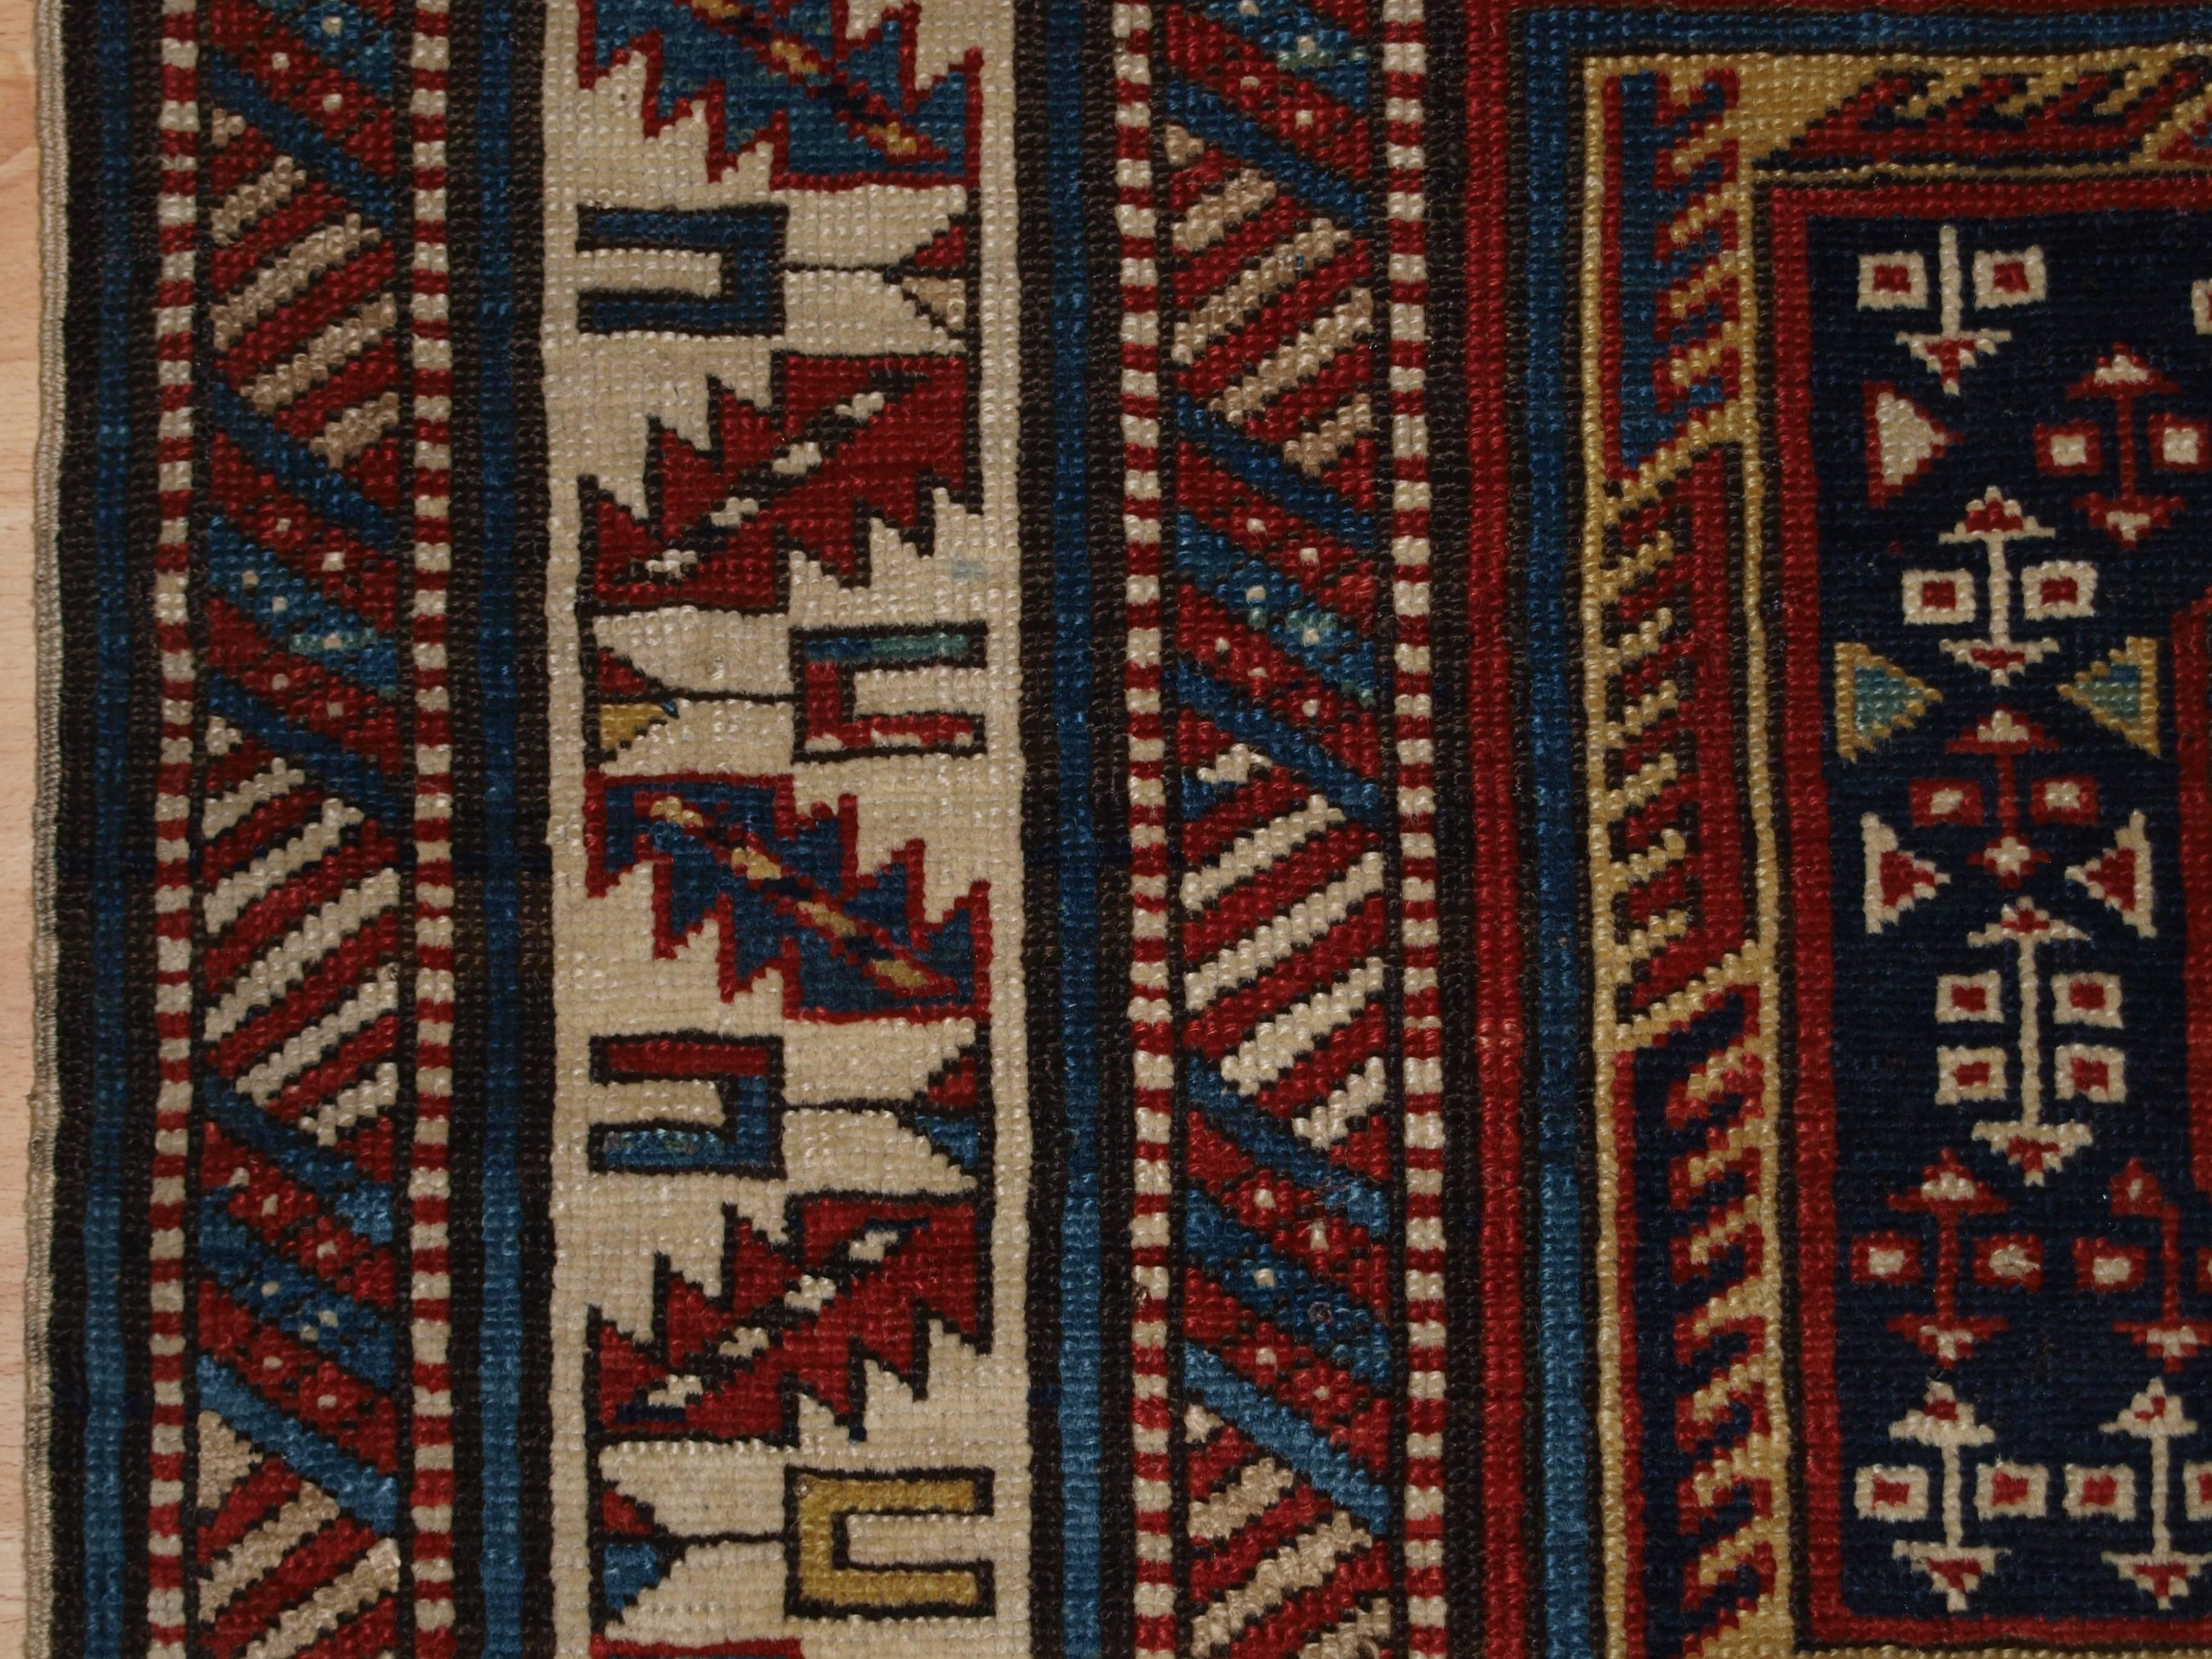 Antique Caucasian Shirvan Rug with 'Surahani' Garden Design, Late 19th Century For Sale 1